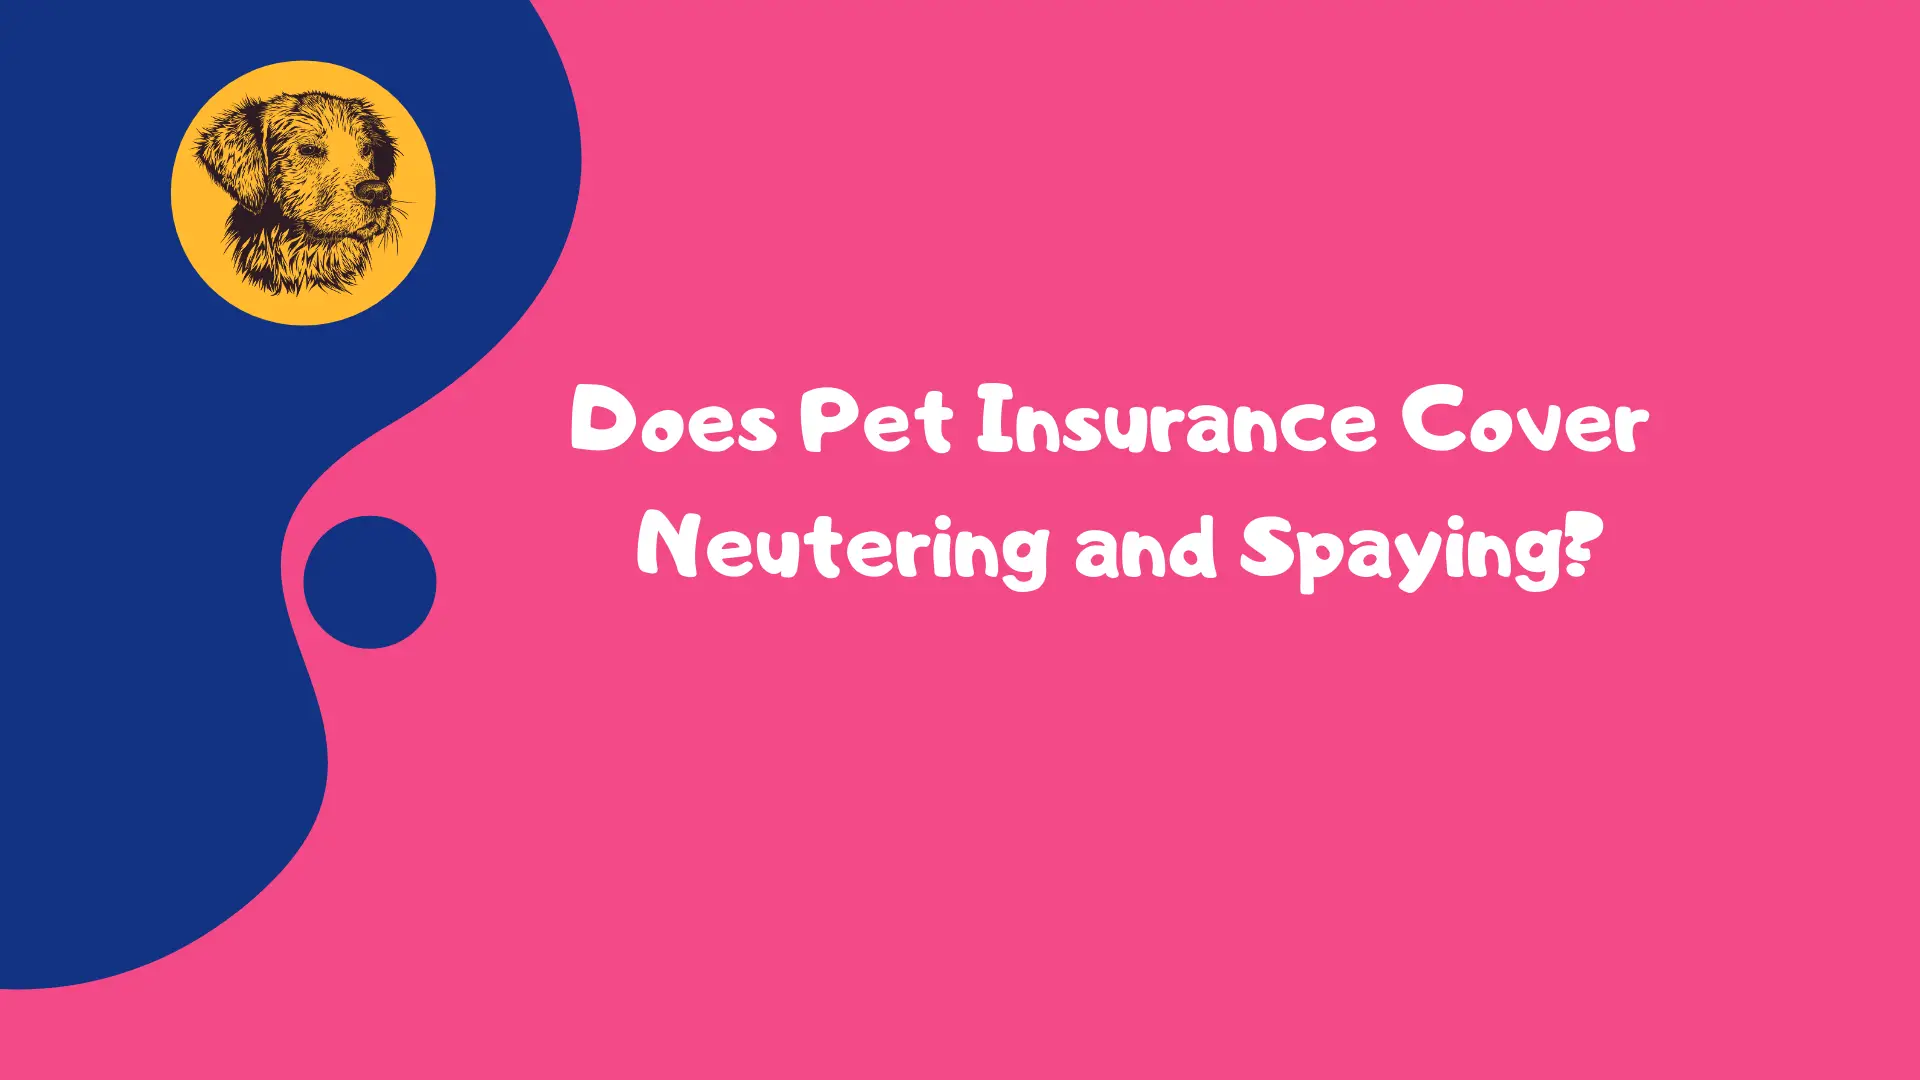 Does Pet Insurance Cover Neutering and Spaying?​